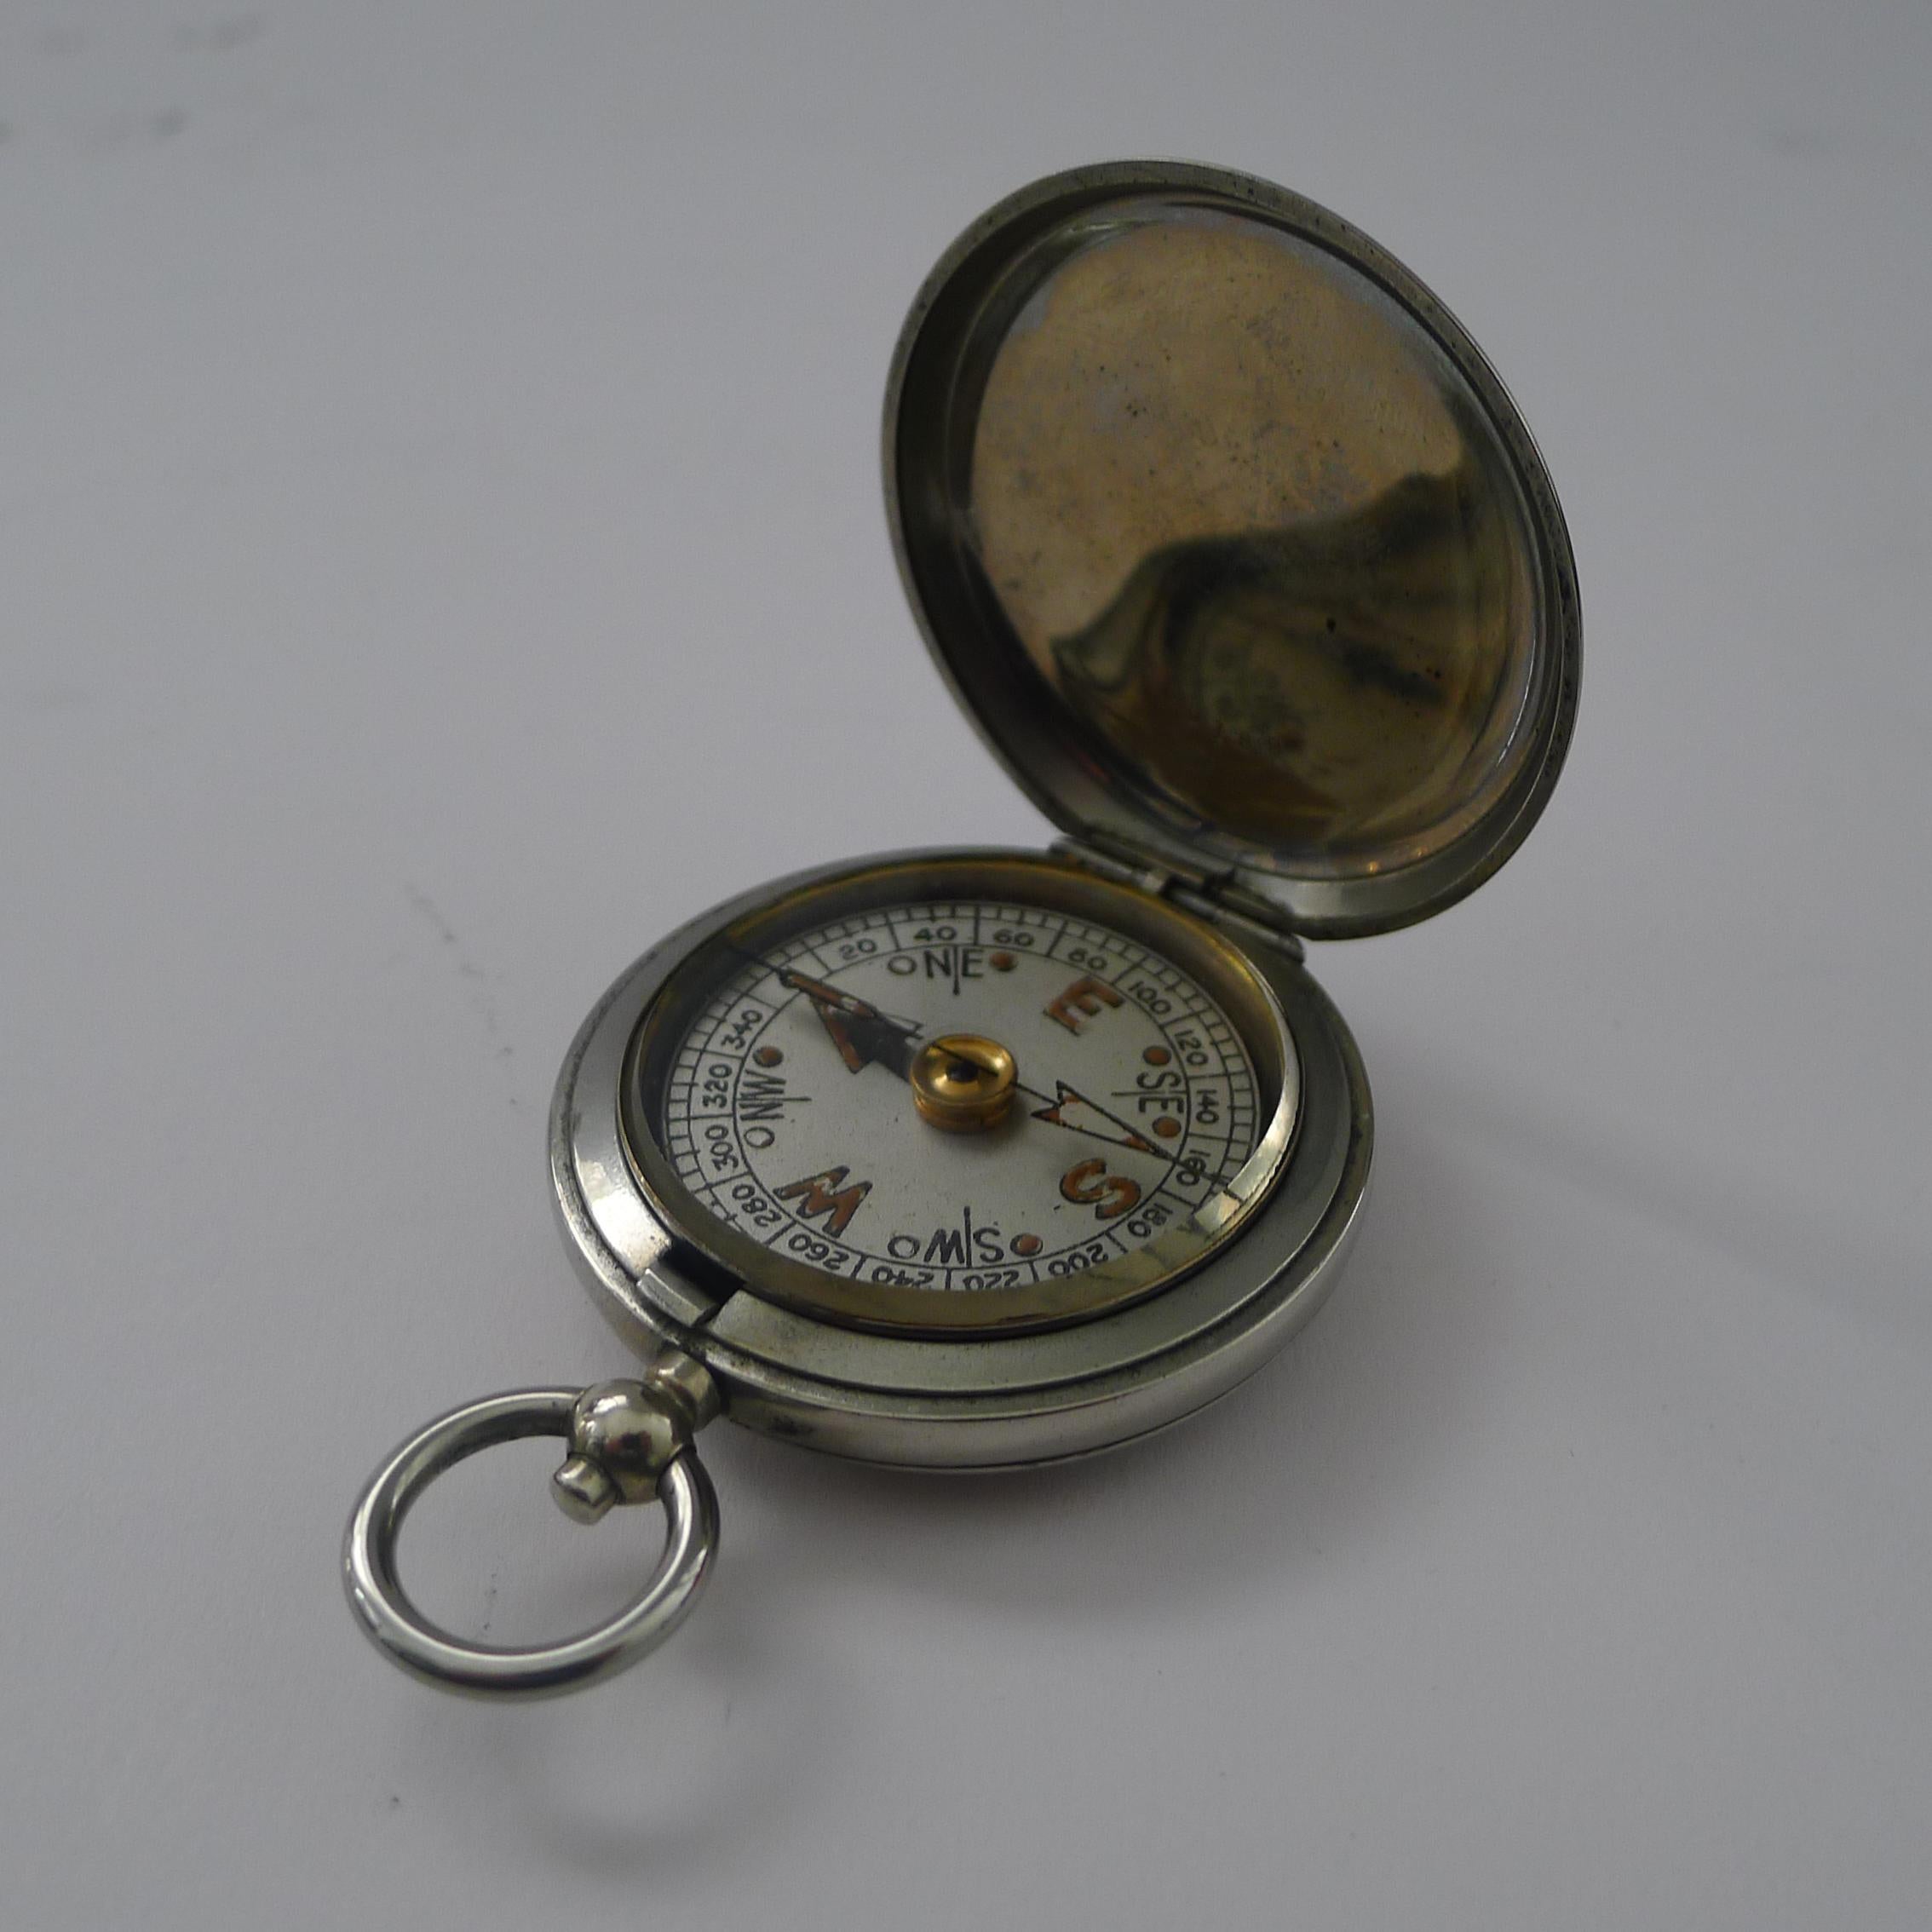 Early 20th Century WW1 British Army Officer's Compass - C Haseler & Son c.1918